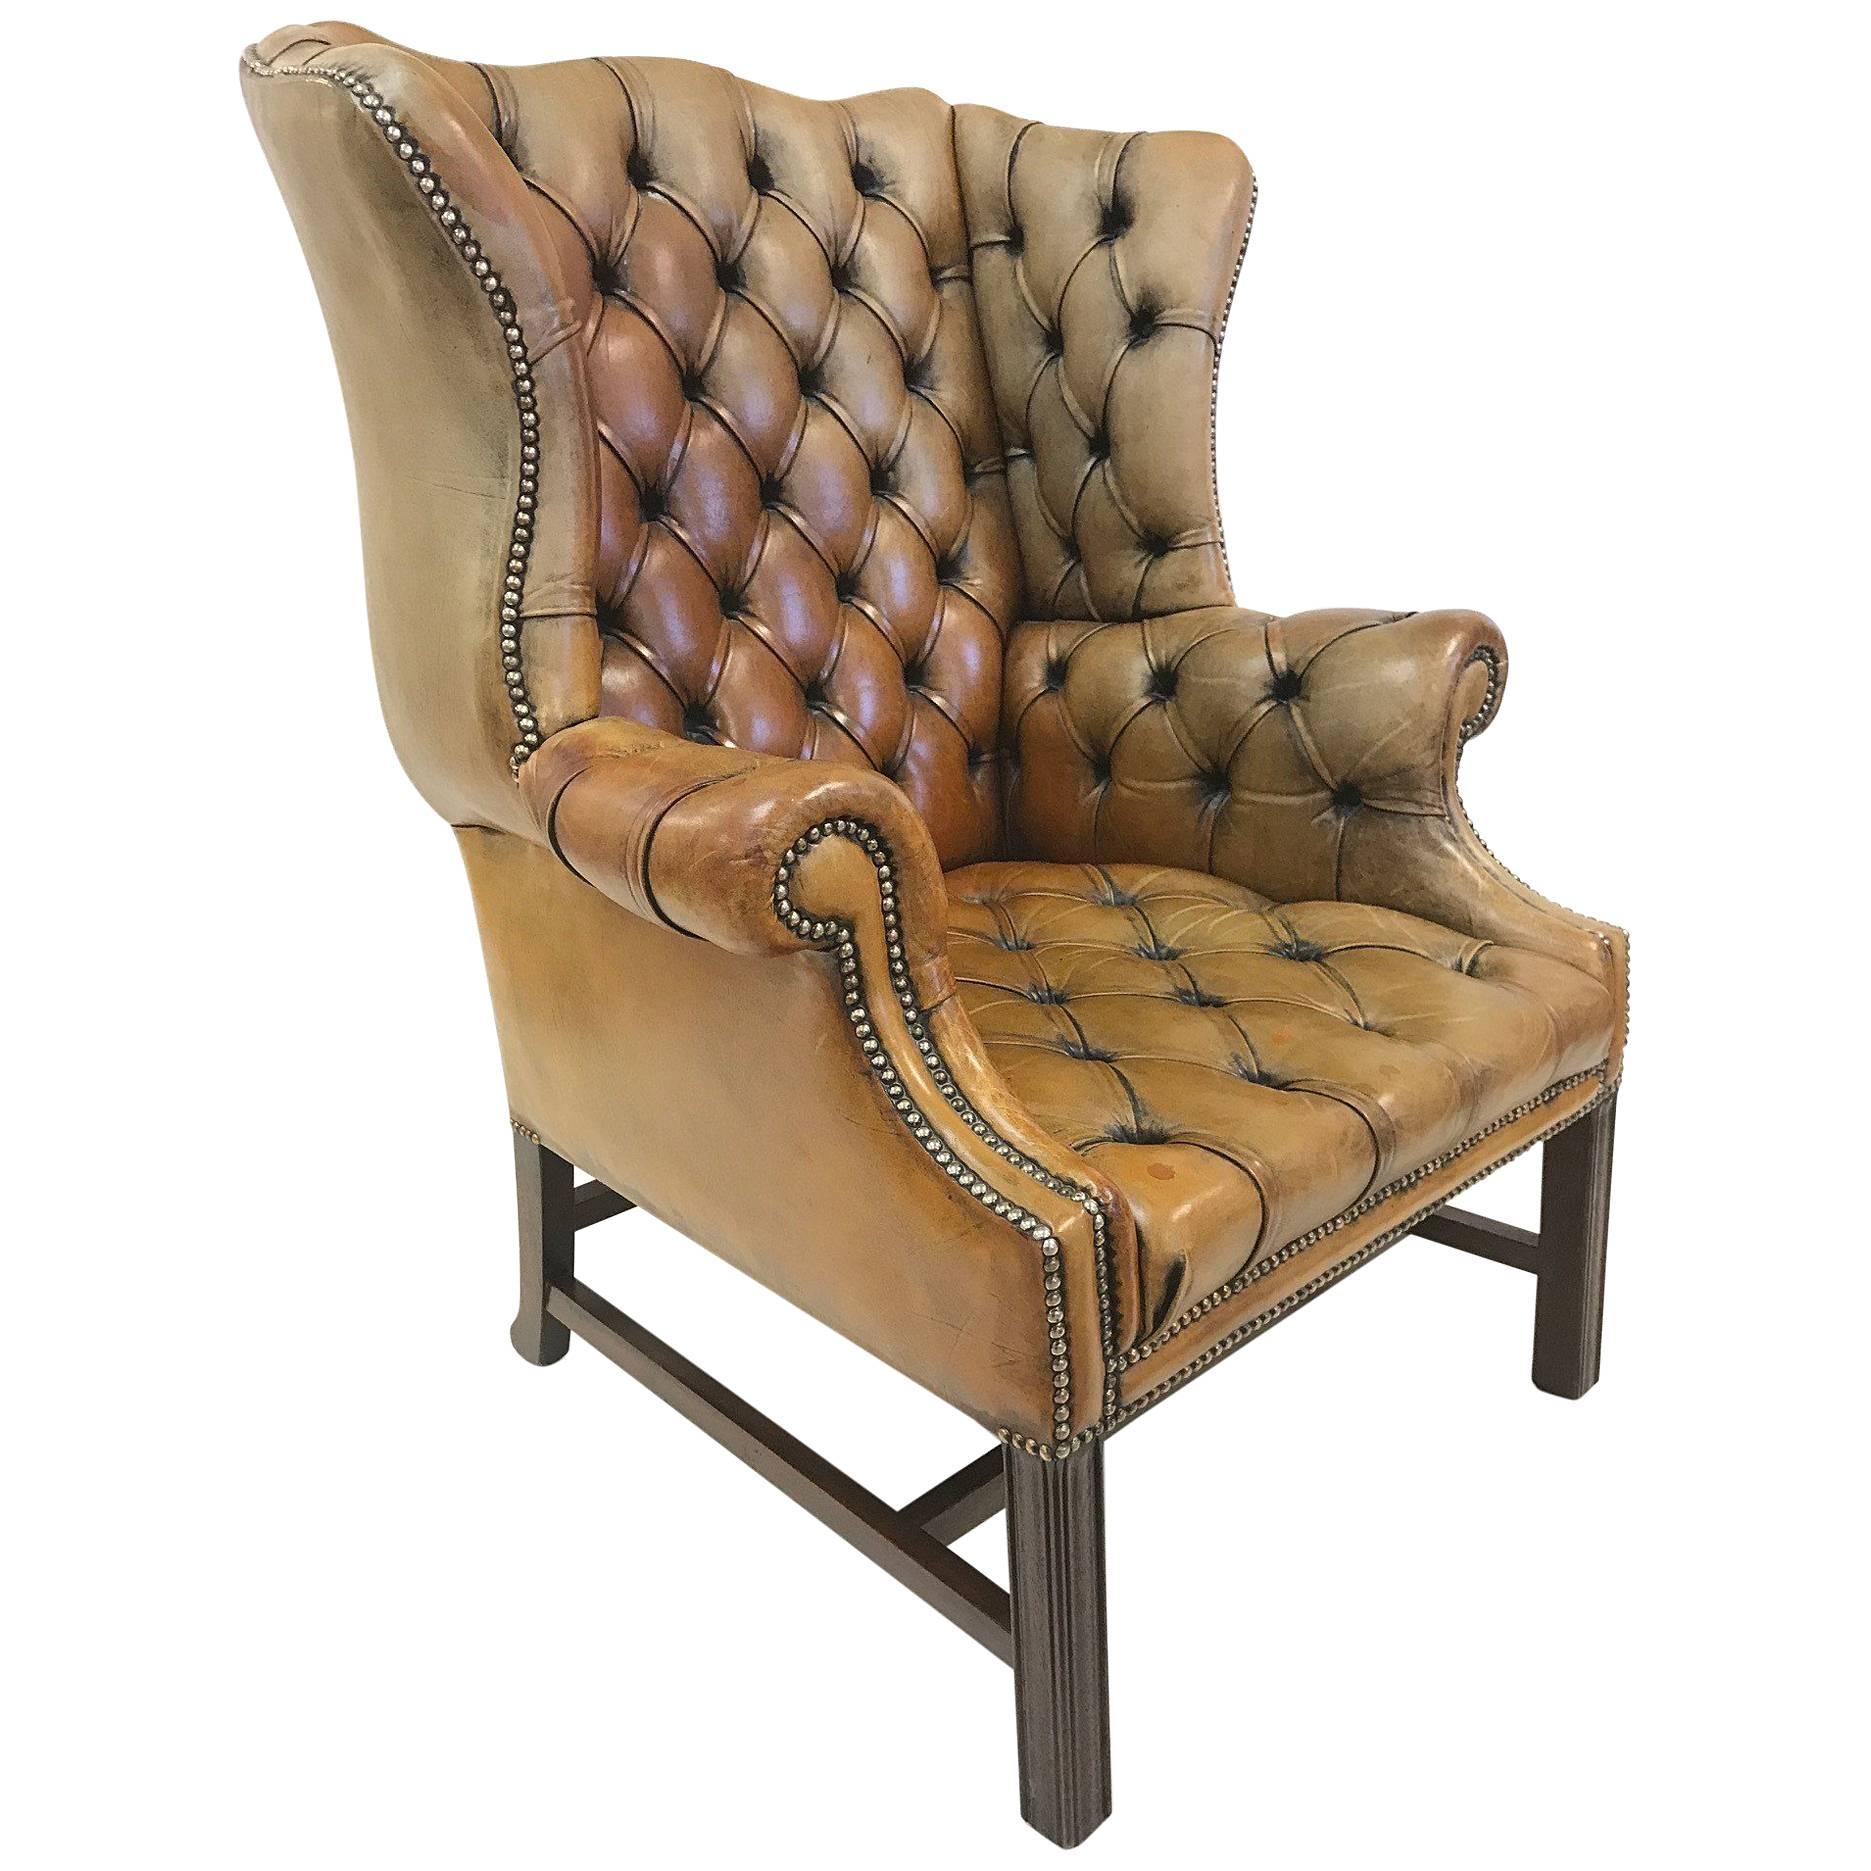 Vintage leather tufted wingback library chair. Has a solid walnut base.